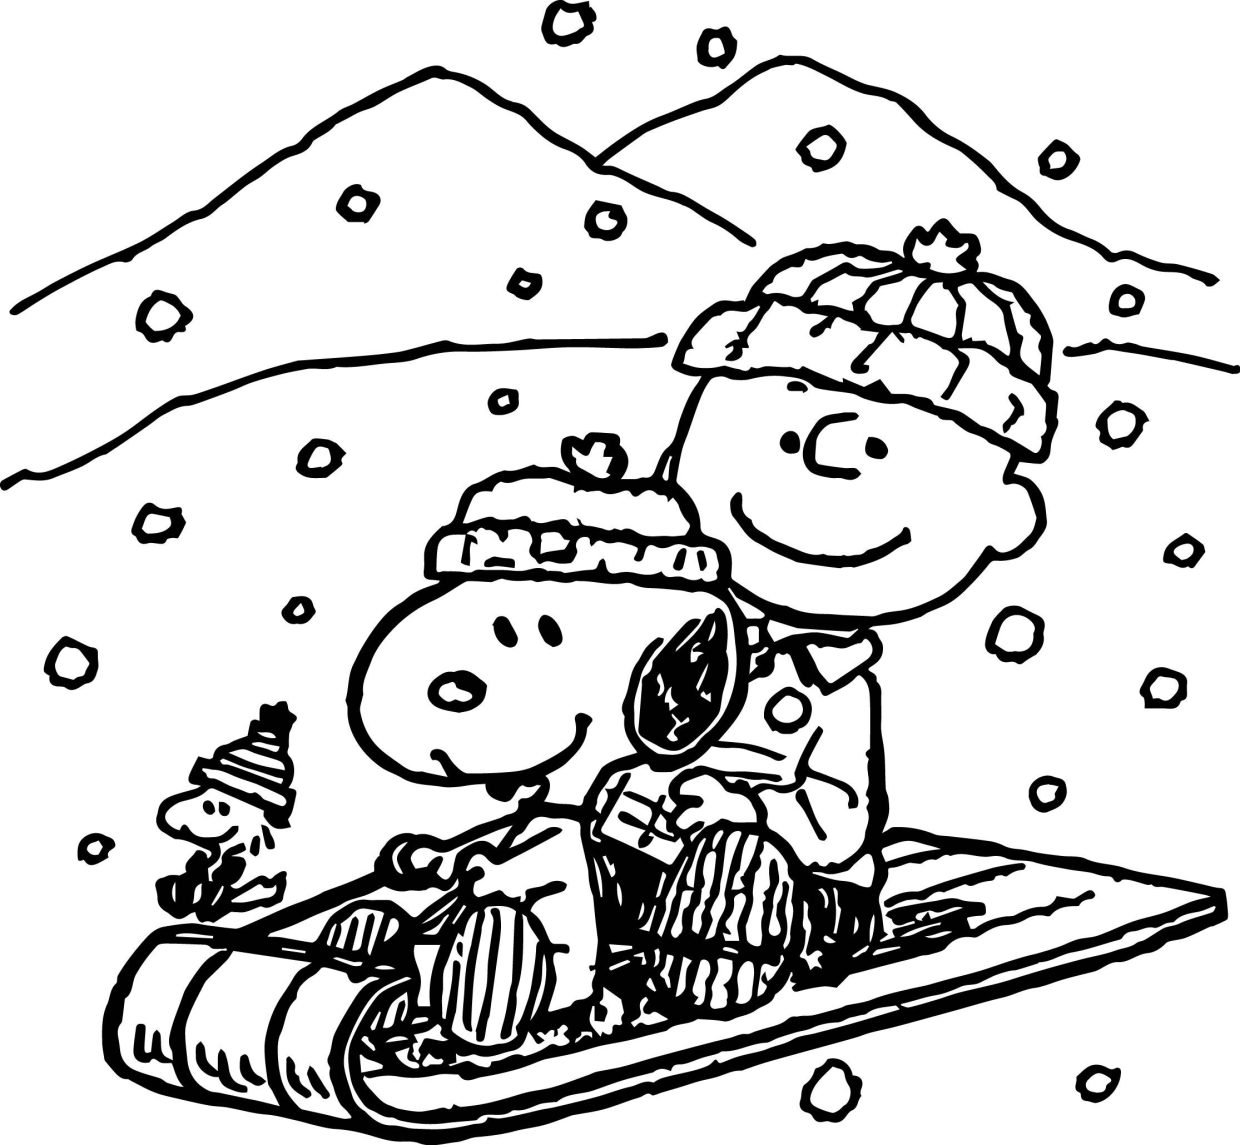 Enjoy coloring with free peanuts coloring pages for kids